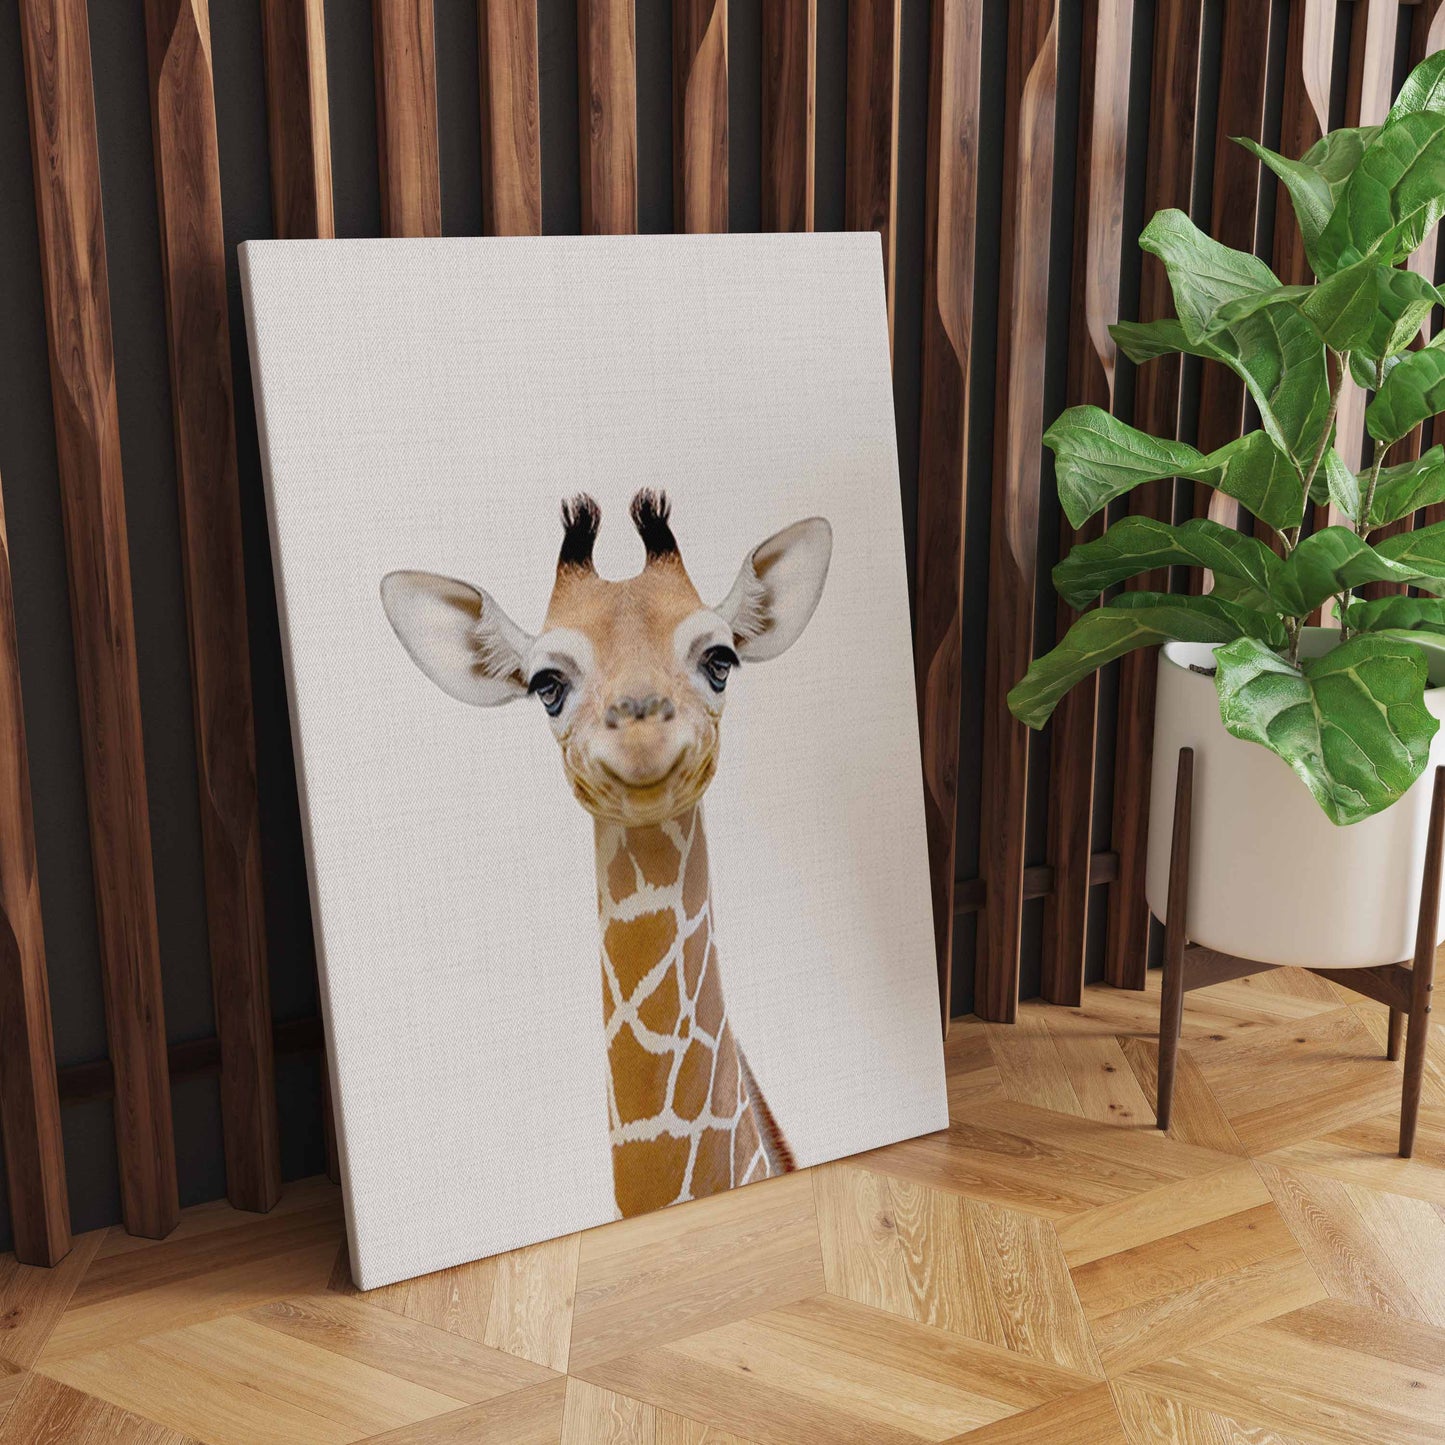 Whimsical Wonders: Adorable Baby Animal Characters for Your Walls - Delightful And Charming S04E06